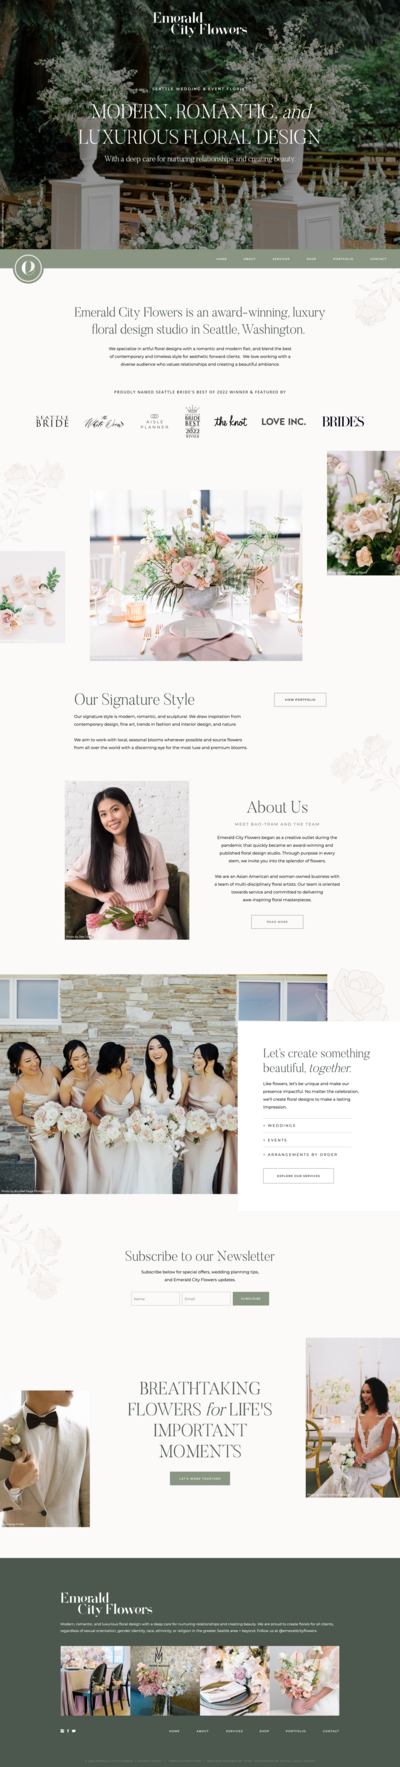 Custom Showit website design for Moxie Bright Events, a Los Angeles wedding planner